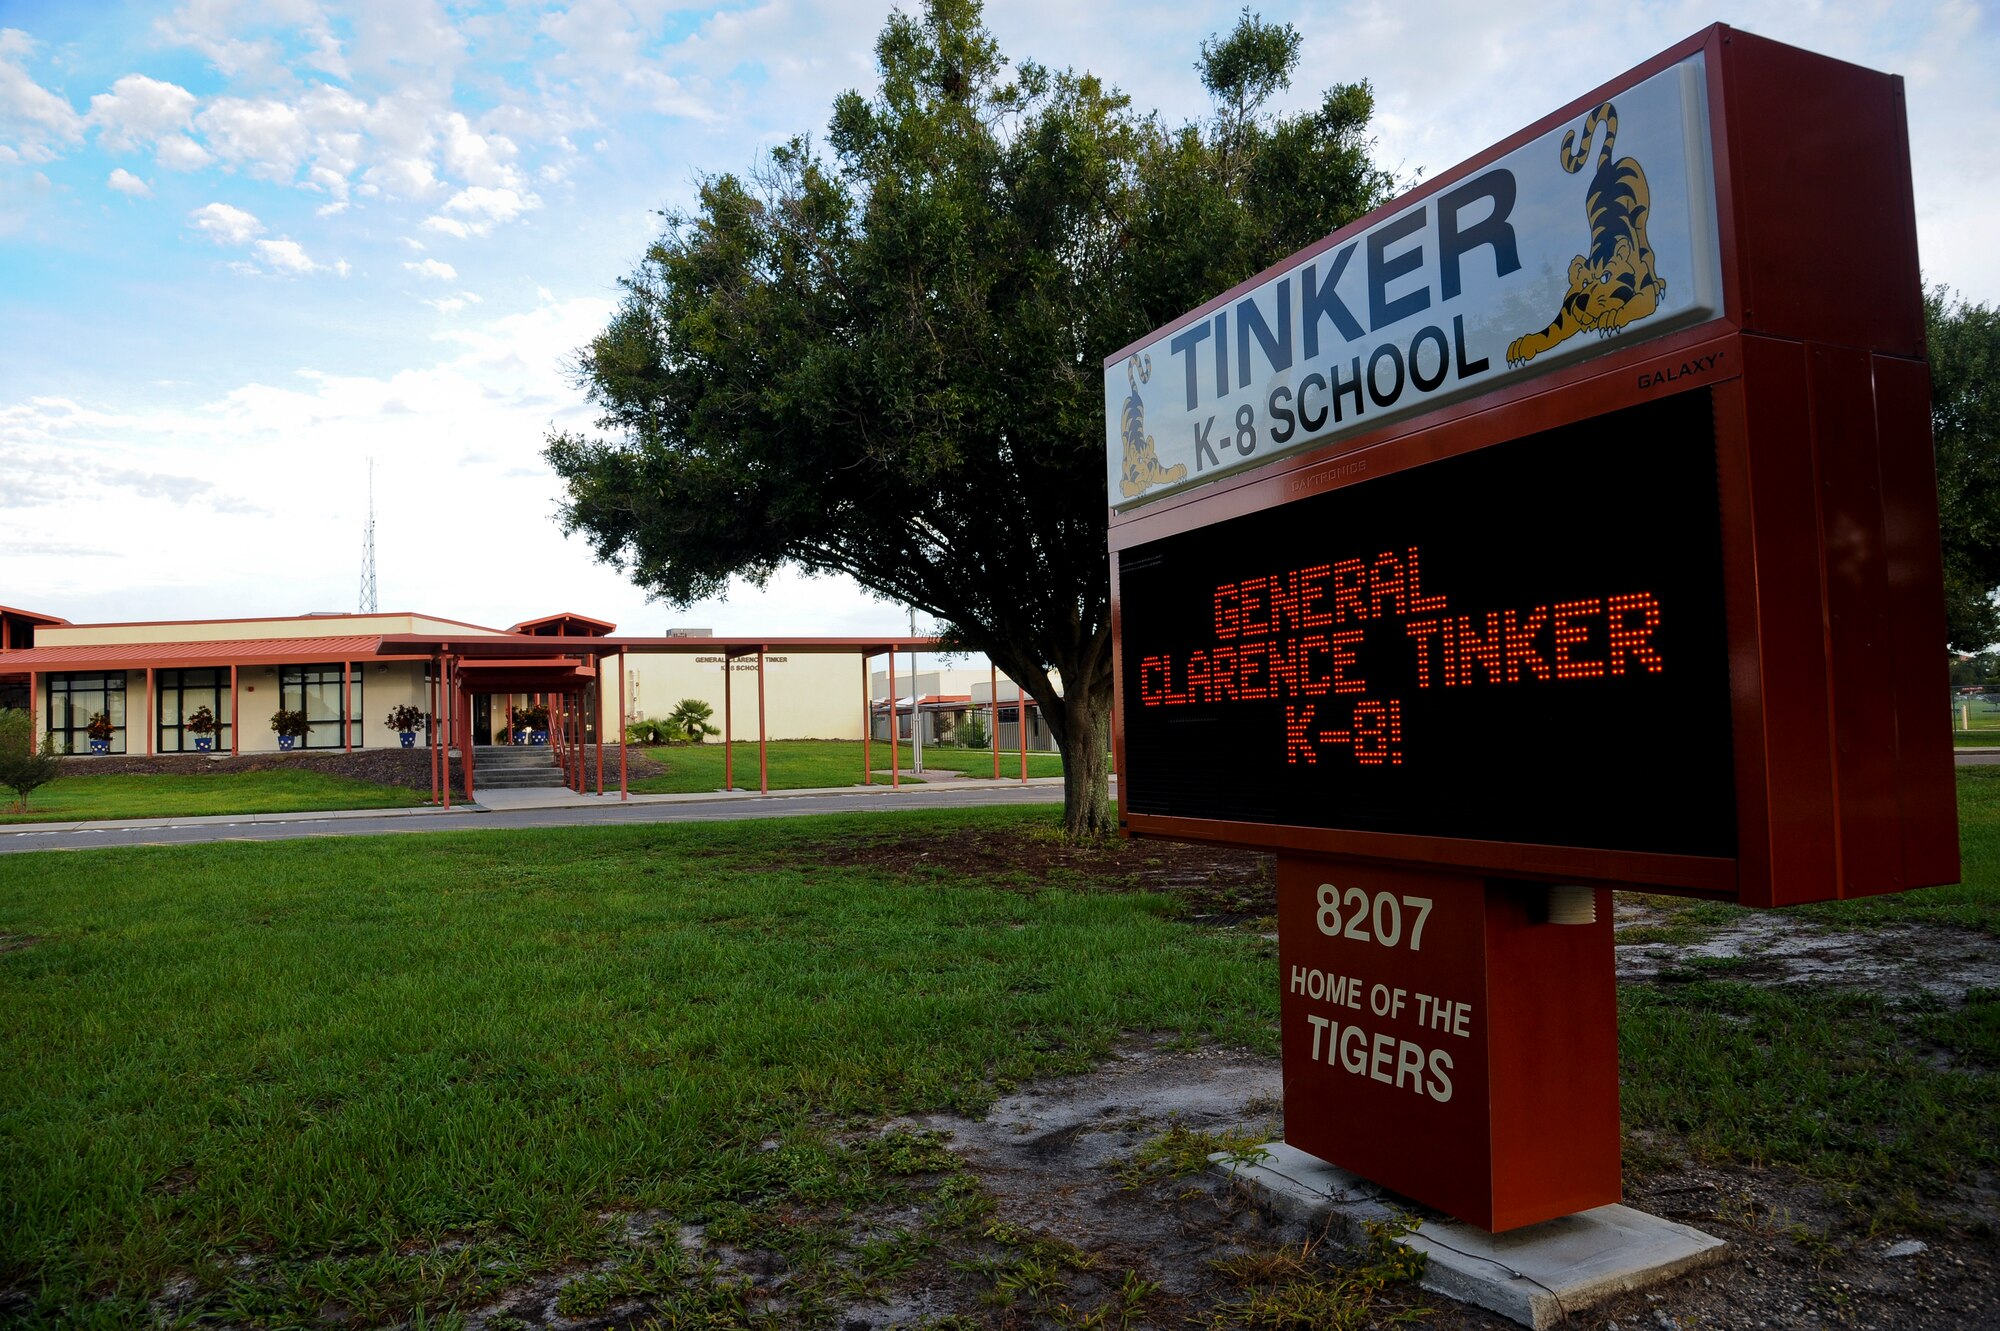 The marquee in front of General Clarence Tinker K-8 School displays the new grade range at MacDill Air Force Base, Fla., Aug. 14, 2015. Student registration hours are Monday through Thursday from 8:30-11:30 a.m. and 12:30-3:30 p.m. (U.S. Air Force photo by Airman 1st Class Danielle Quilla/Released)